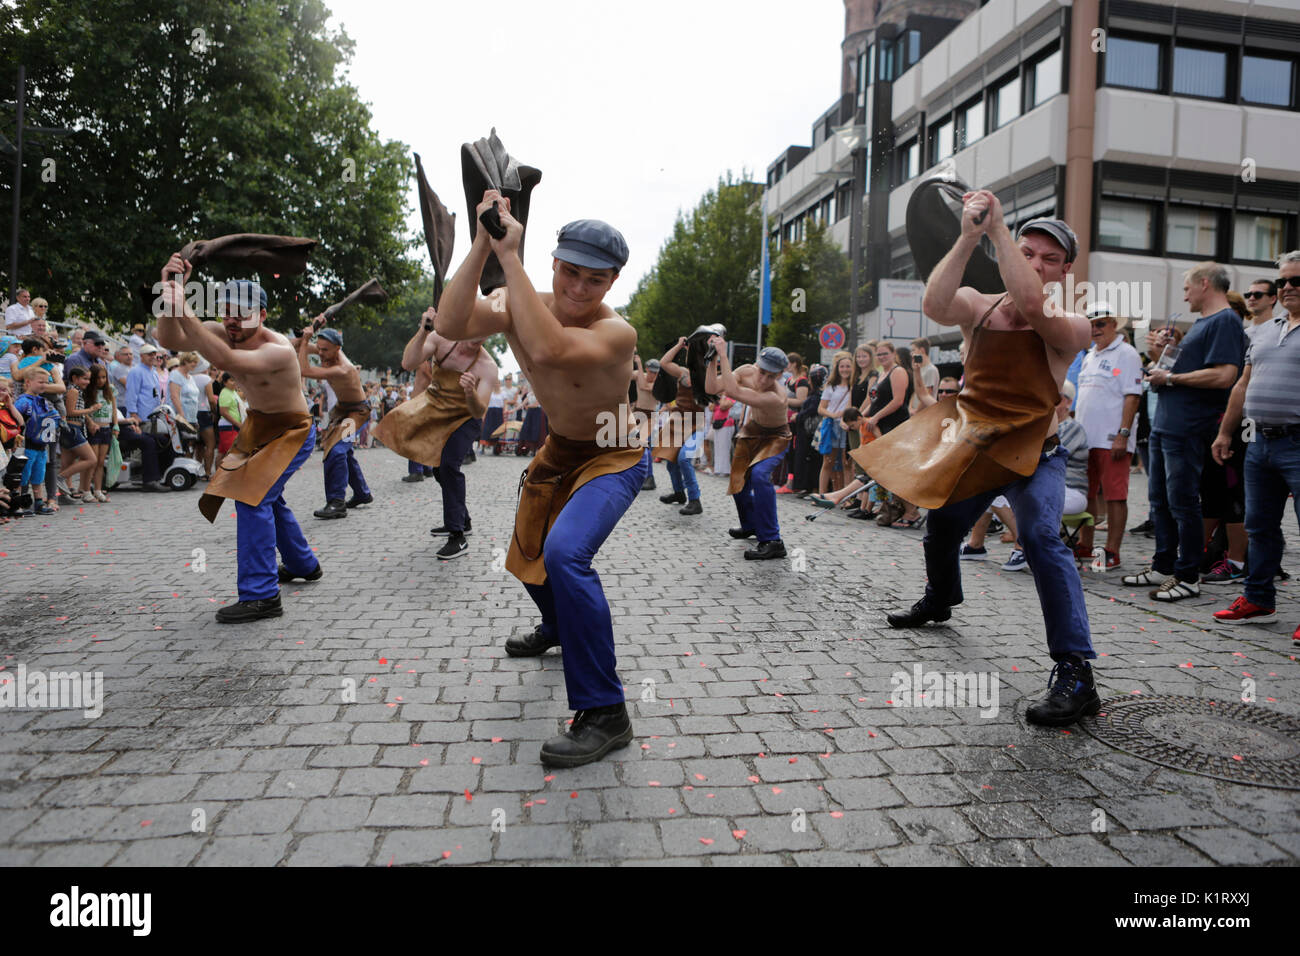 Worms, Germany. 27th August 2017. Students perform the dance of the leather workers. The first highlight of the 2017 Backfischfest was the big parade through the city of Worms with over 80 groups and floats. Community groups, music groups and business from Worms and further afield took part. Credit: Michael Debets/Alamy Live News Stock Photo